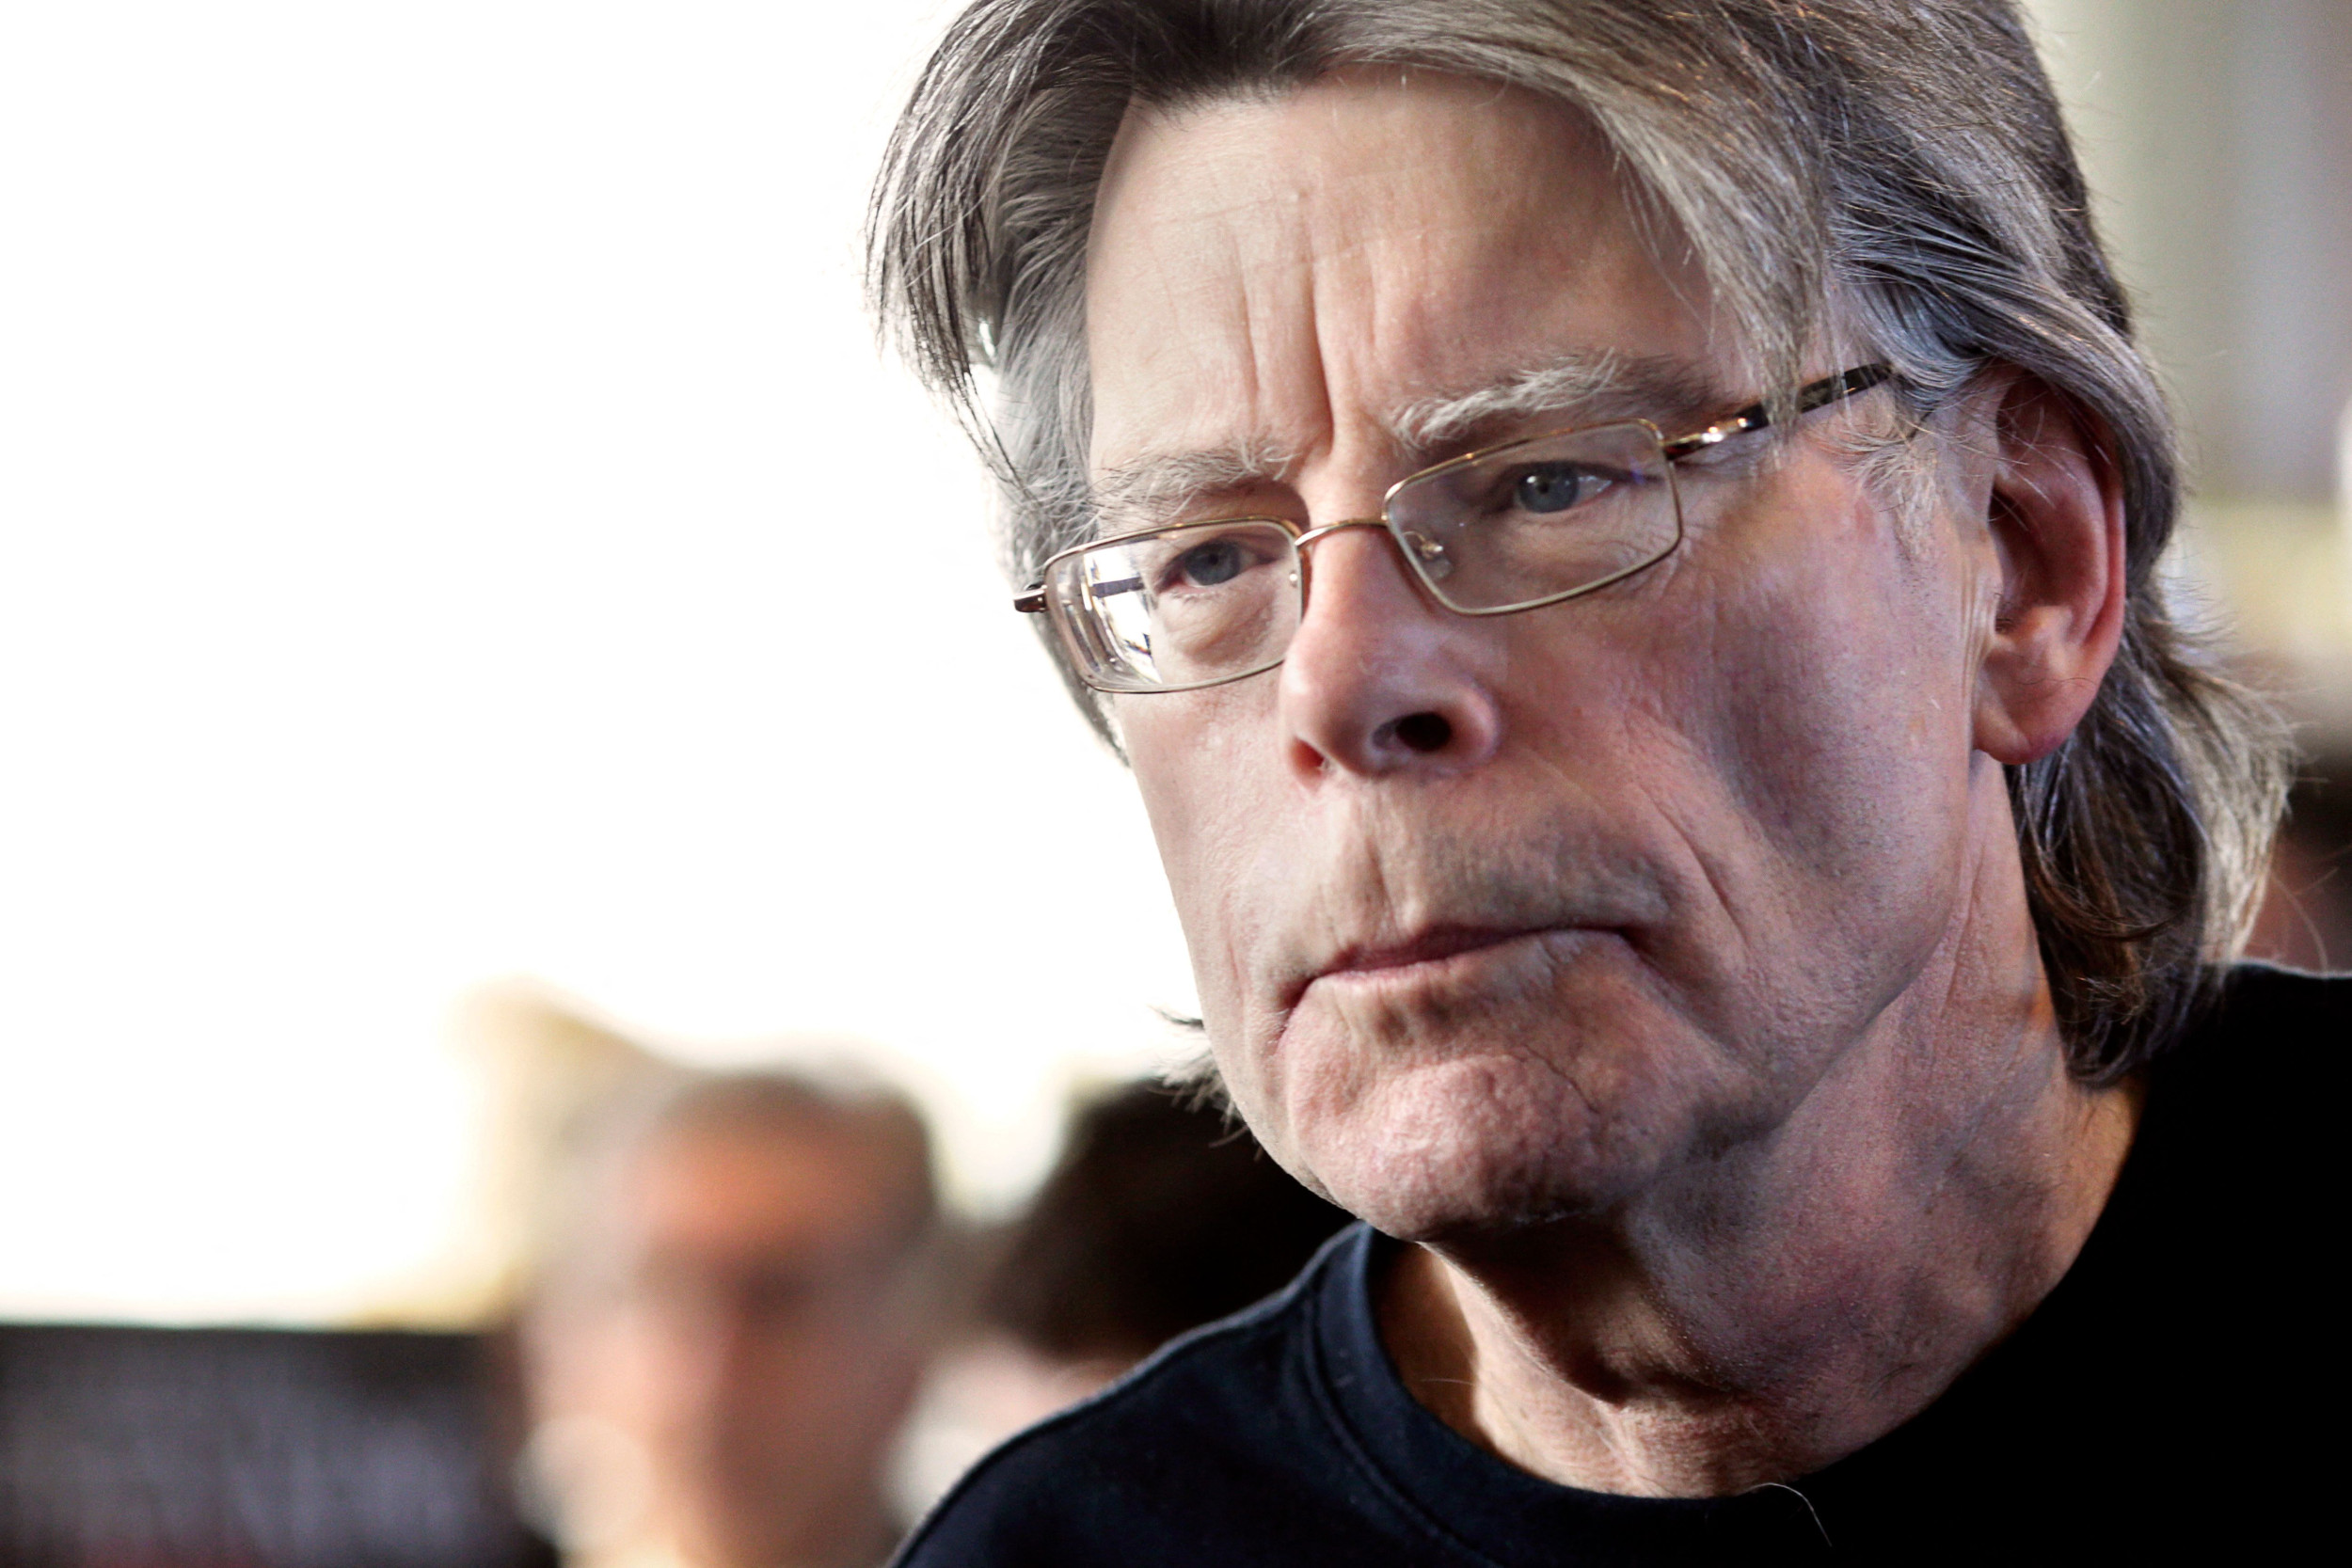 Stephen King Calls Out 'Madness' After Maine Mass Shooting